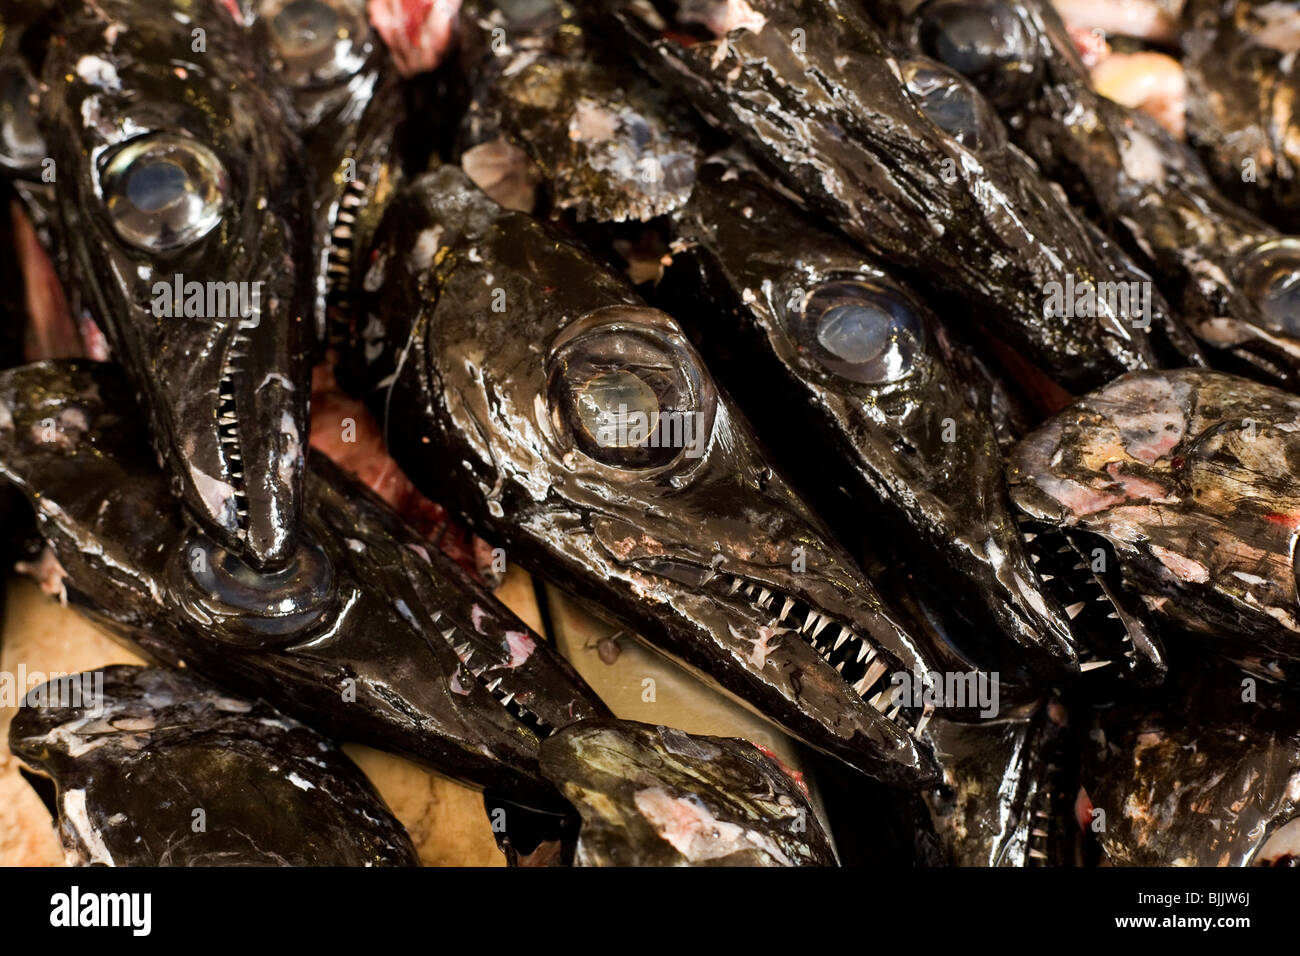 Heads of the sharp toothed deep sea fish, Espada, at the municipal market (Mercado des Lavradores) in Madeira, Portugal. Stock Photo